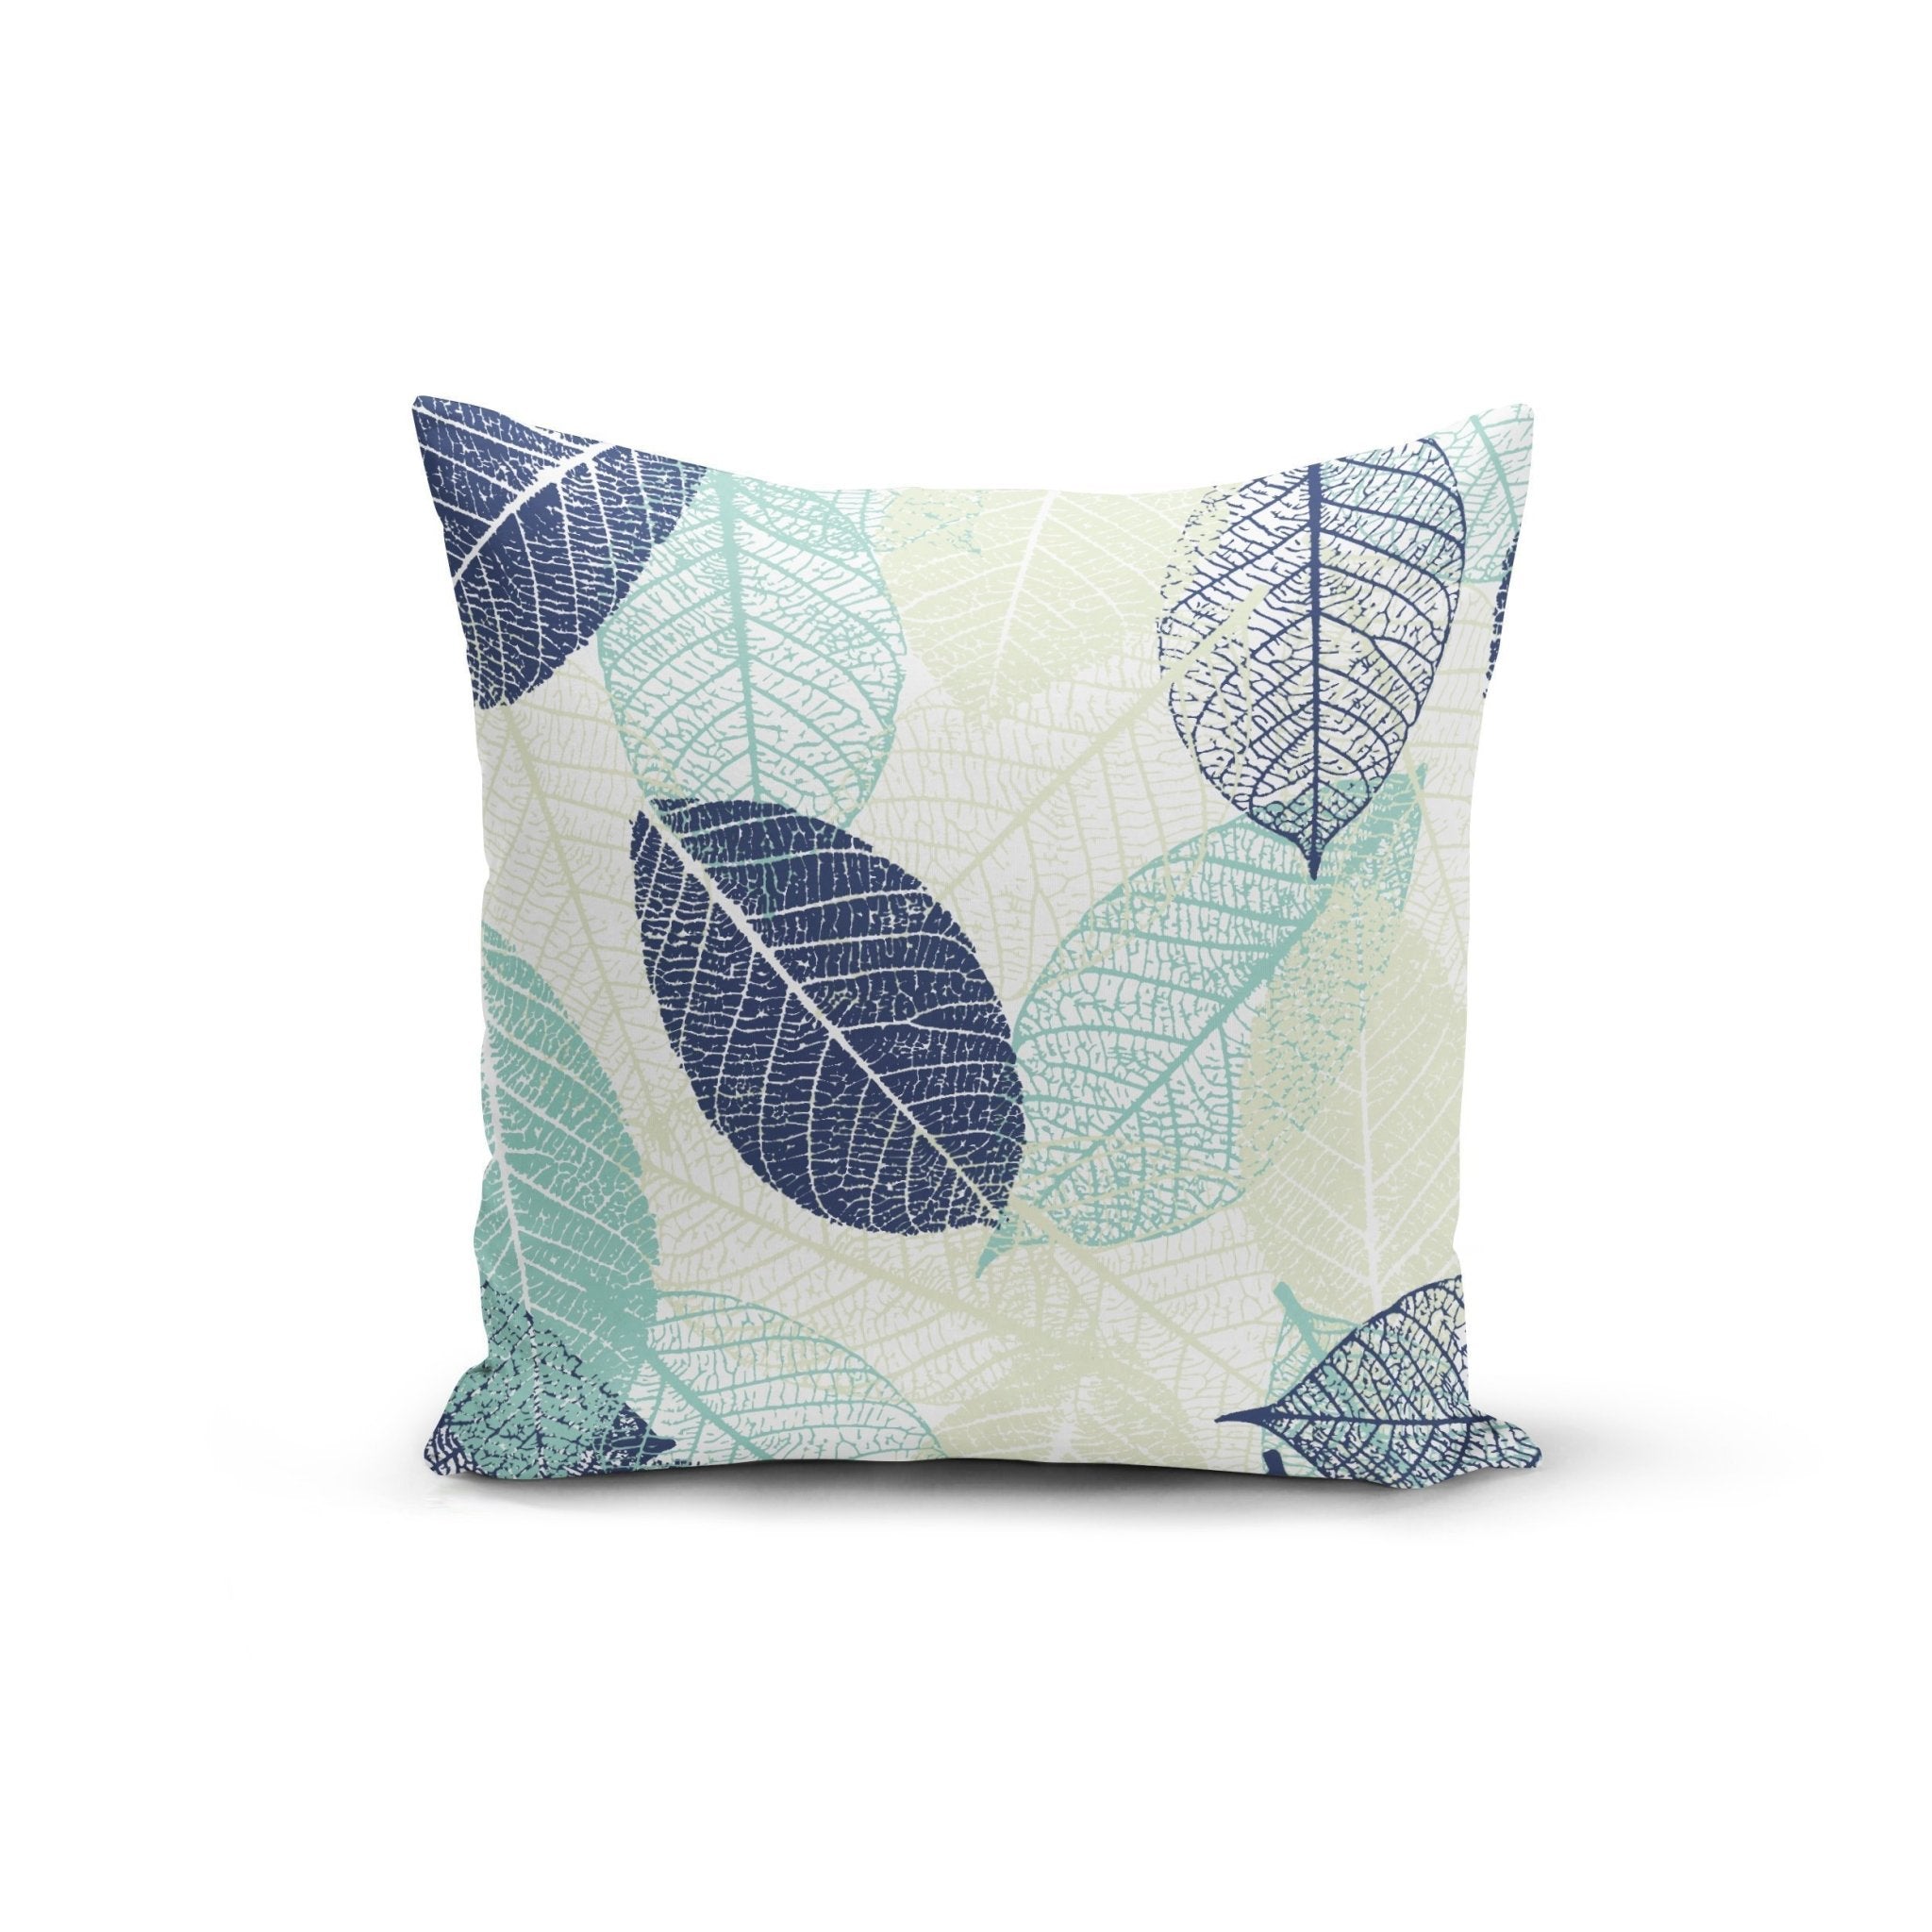 Blue Teal Leaves Pillow Cover - Mahogany Home EssentialsPillow Covers